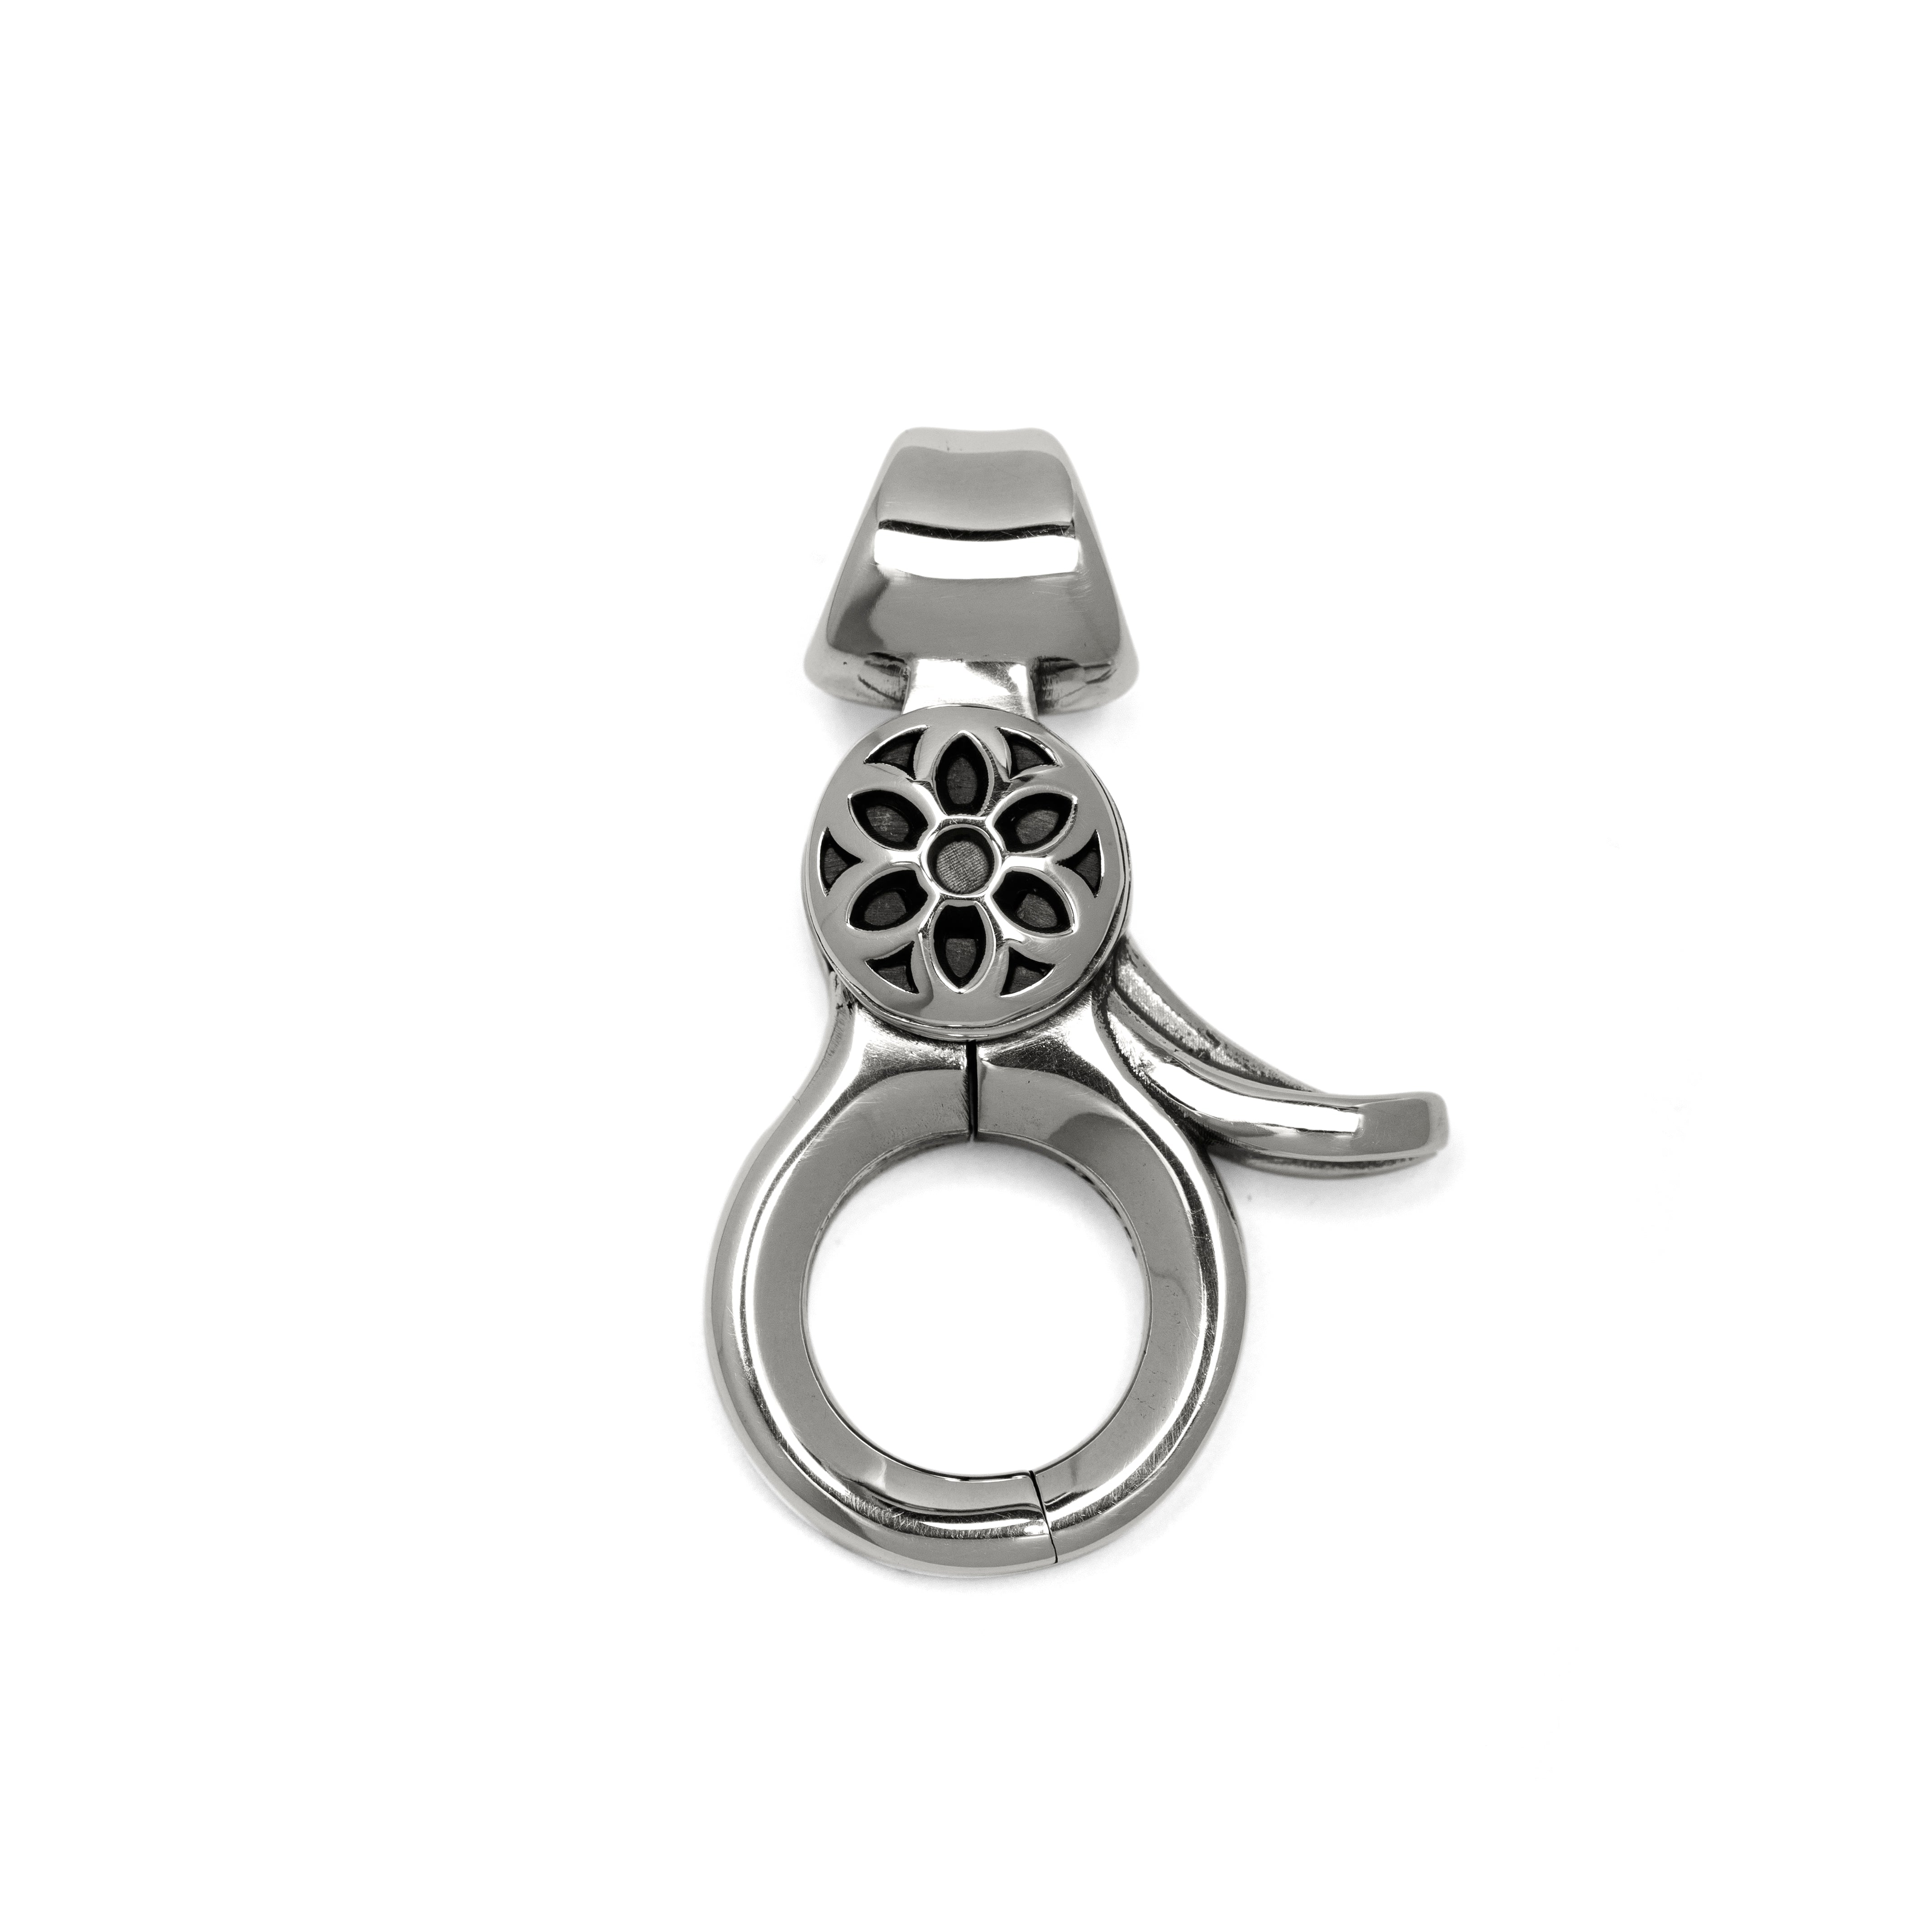 Sterling silver clip with noodle bottom able to attach to necklaces or other keychains.